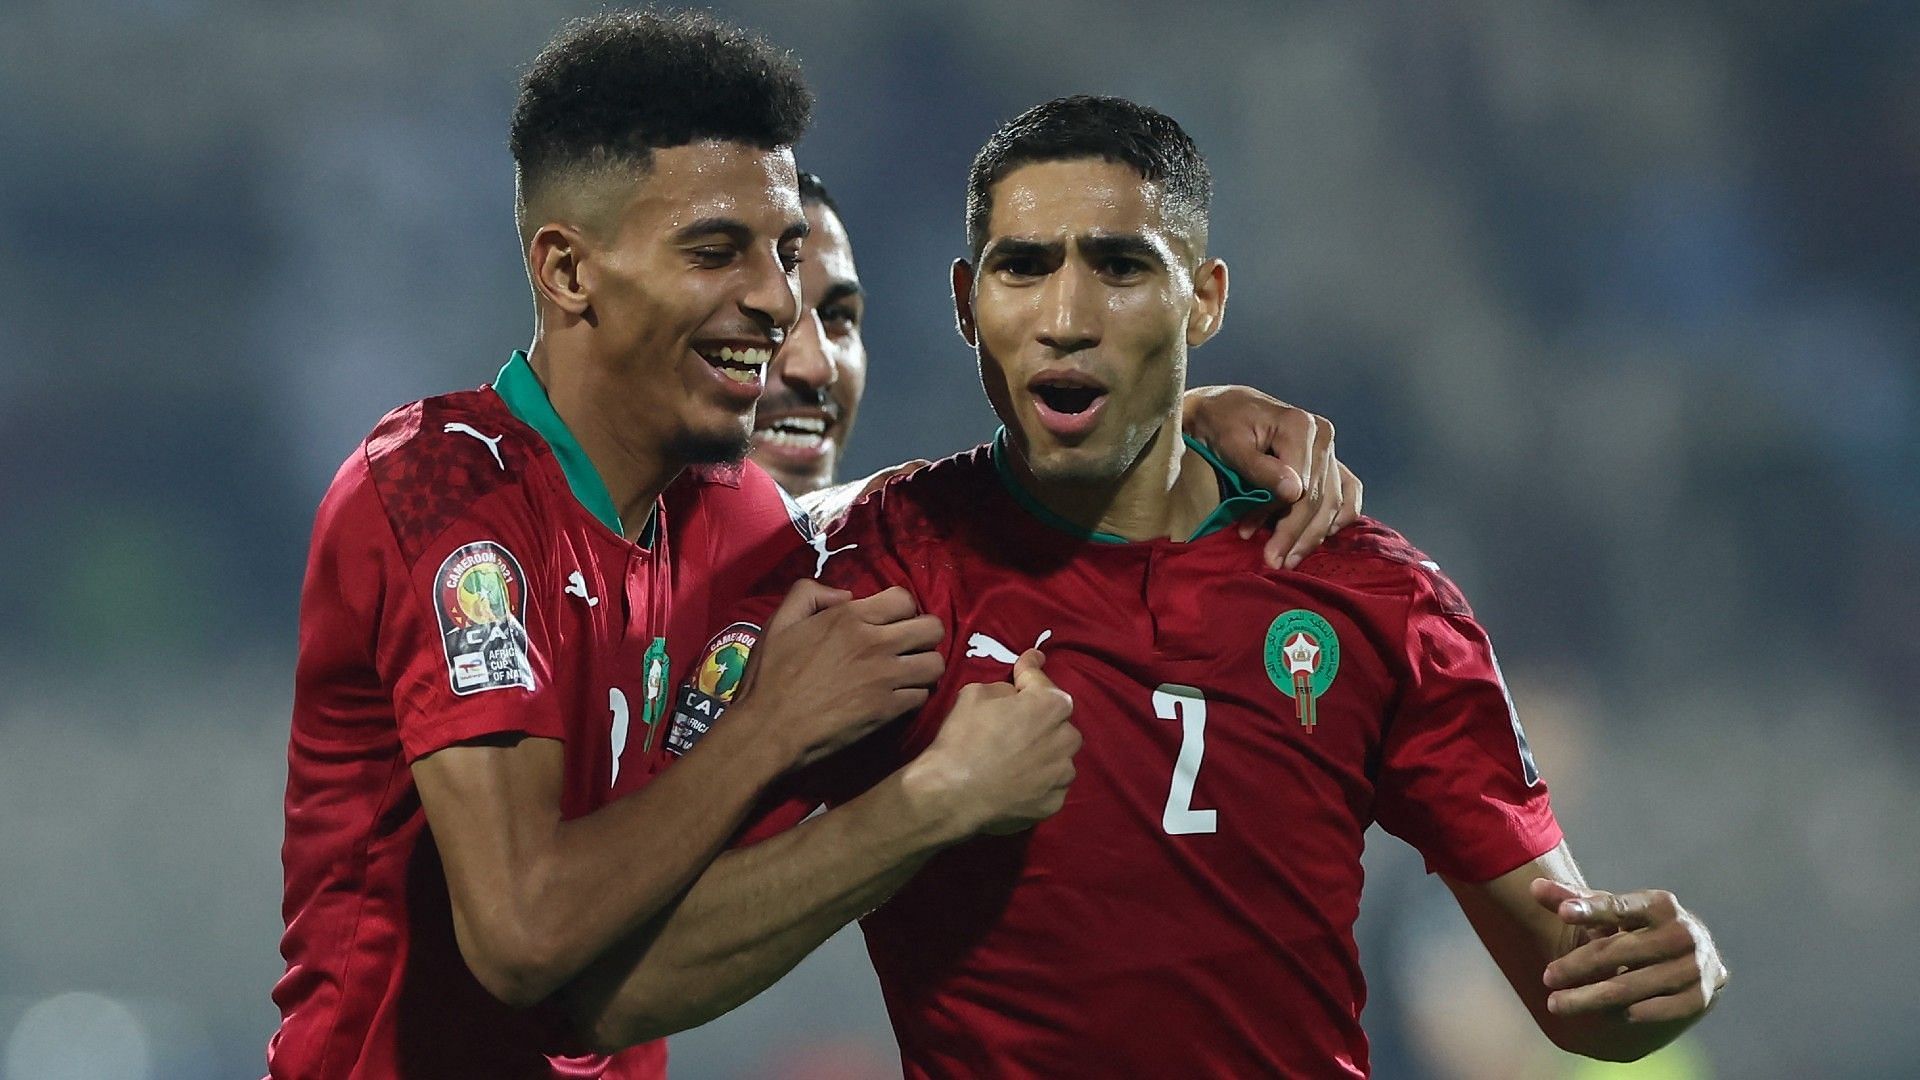 Morocco face DR Congo in their World Cup qualifying fixture on Friday